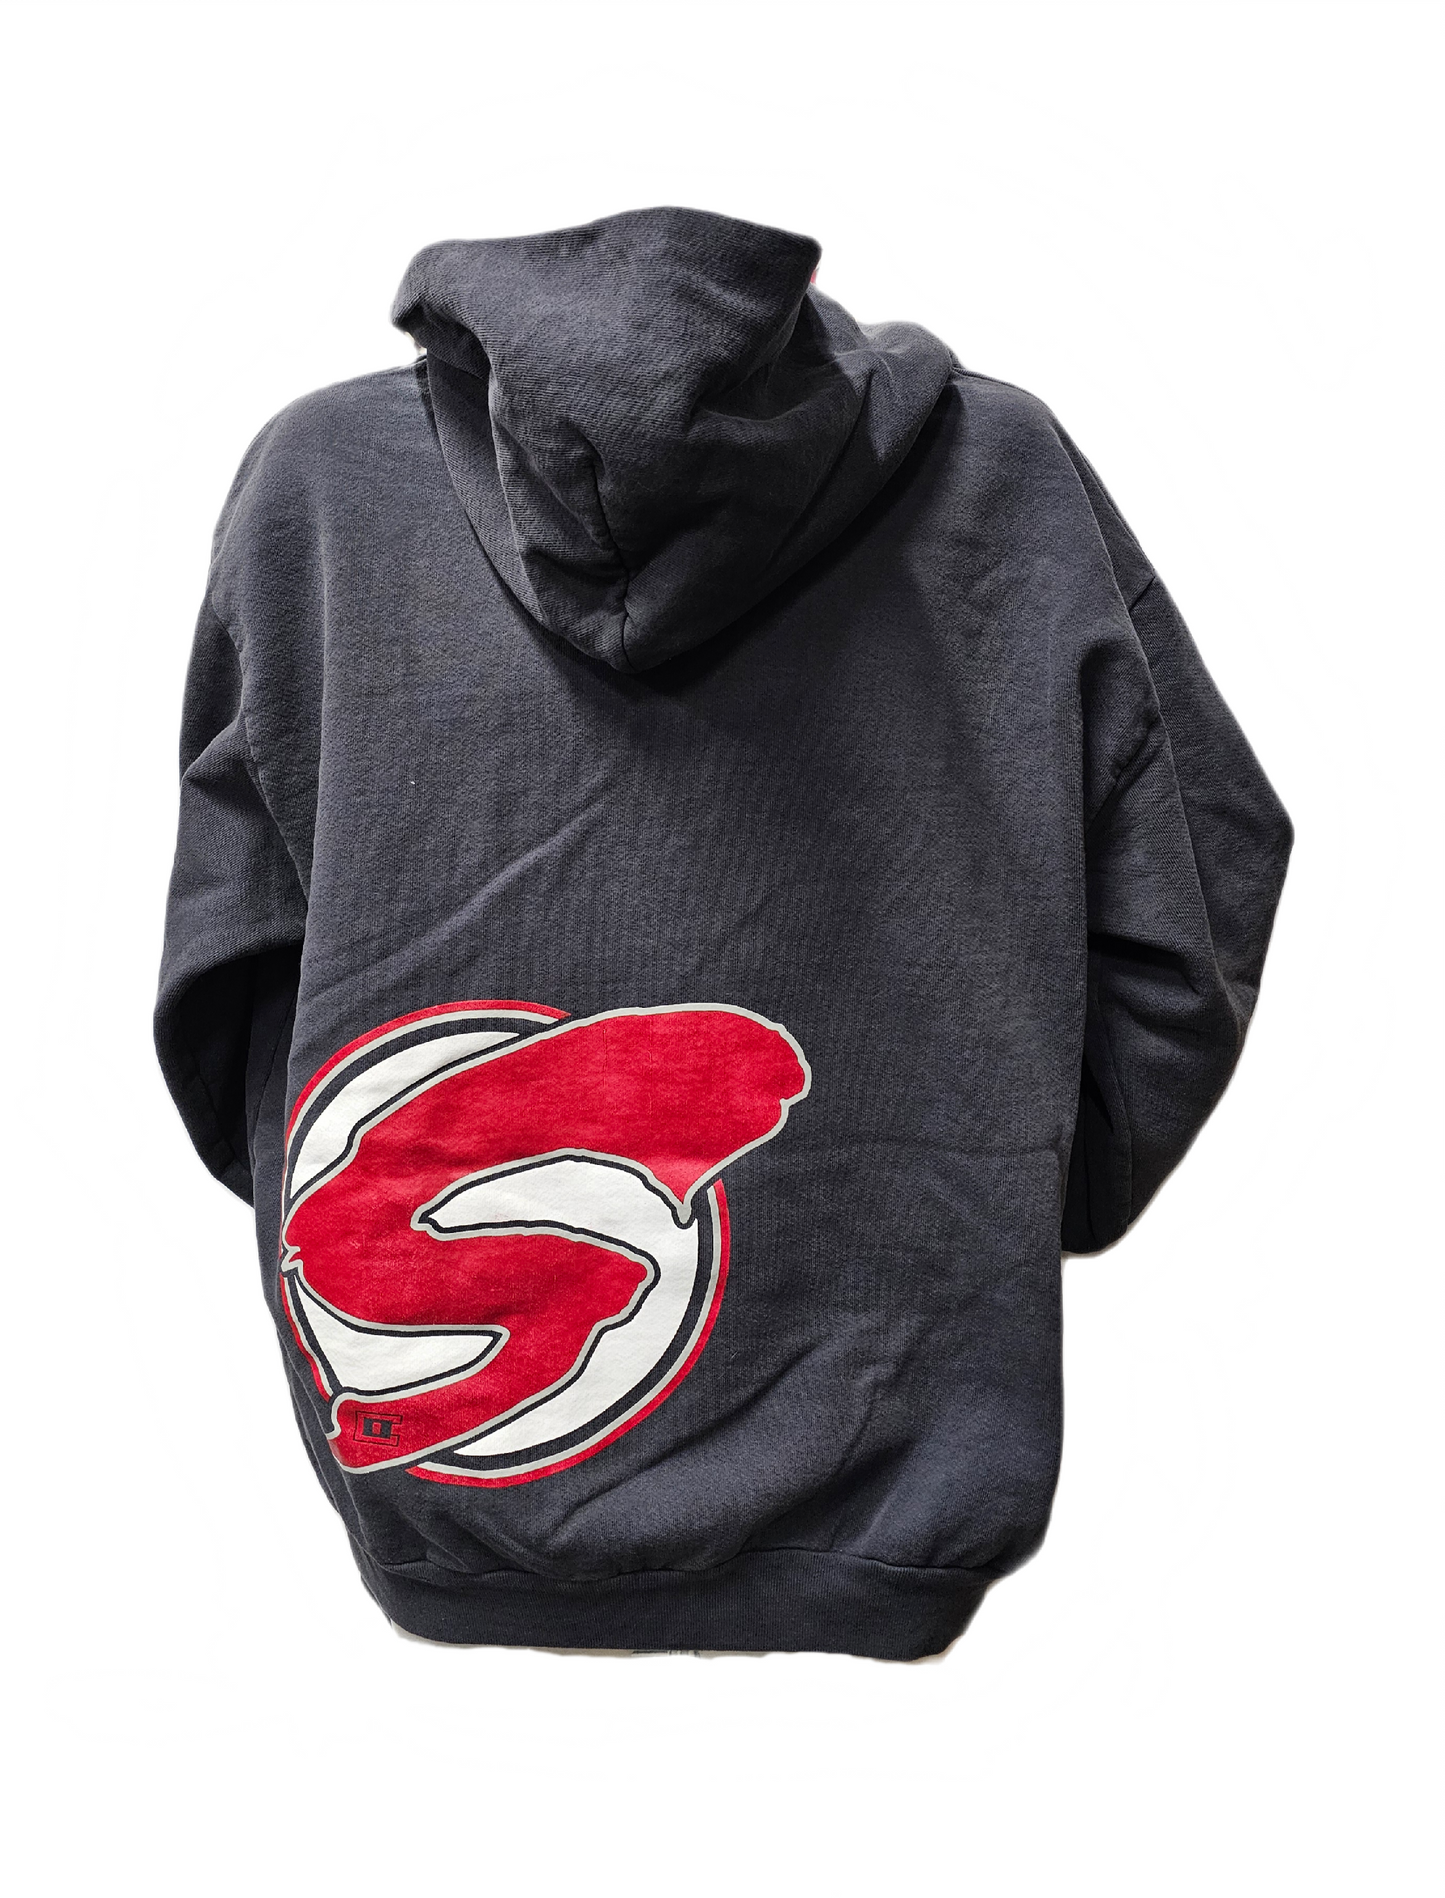 CO Storm Cell Hoodie